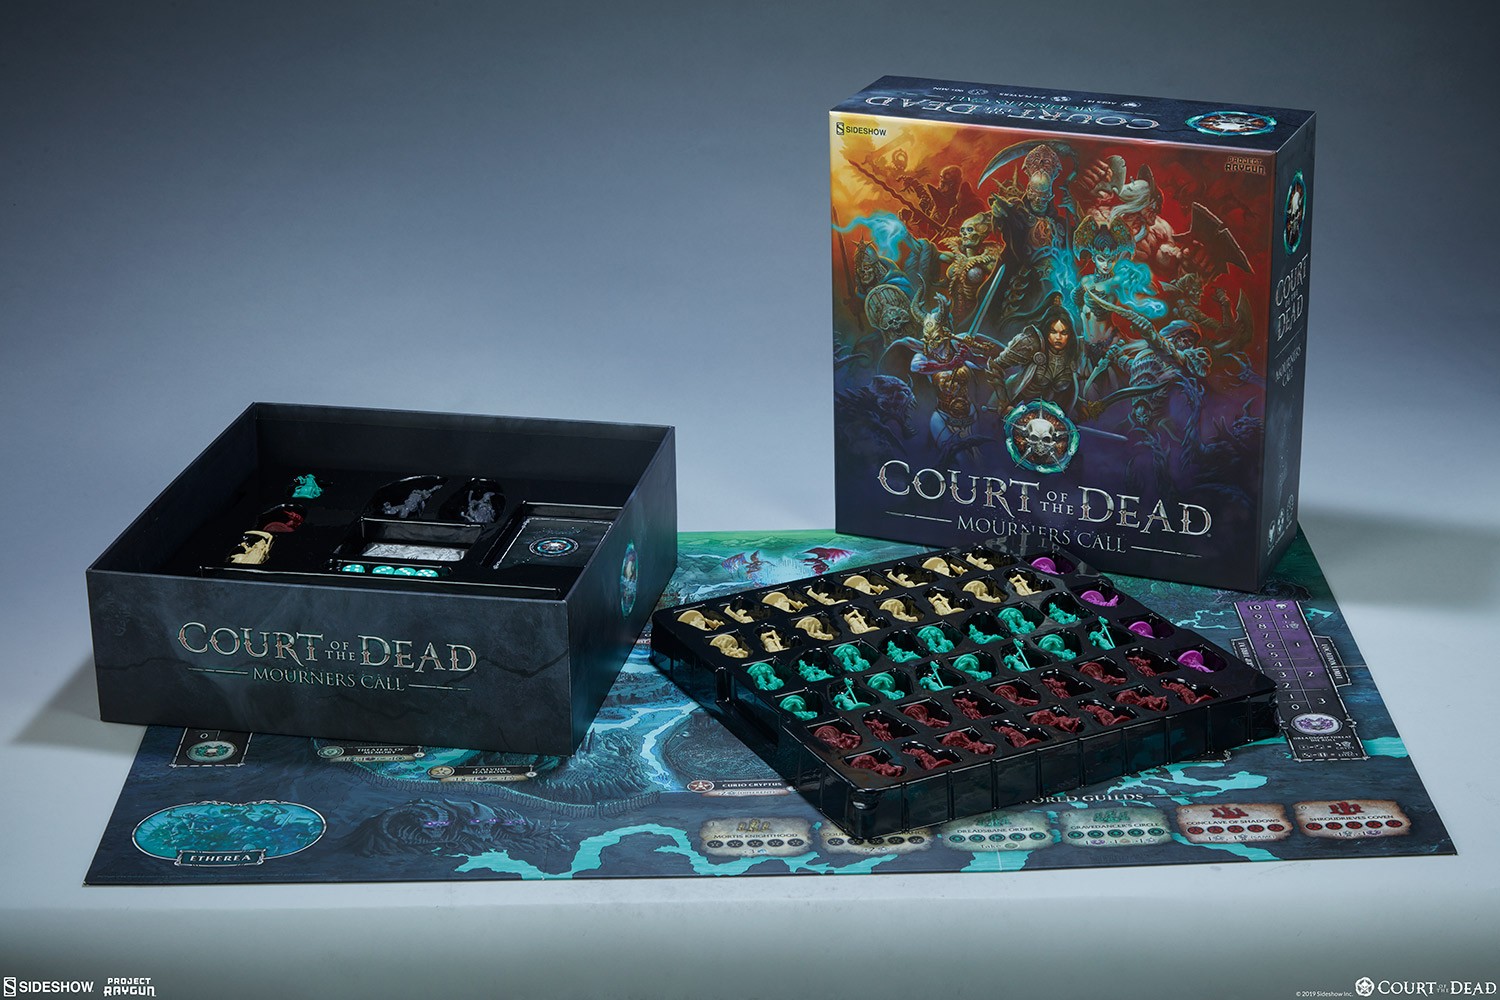 Court of the Dead Mourner's Call Game Collector Edition (Prototype Shown) View 7